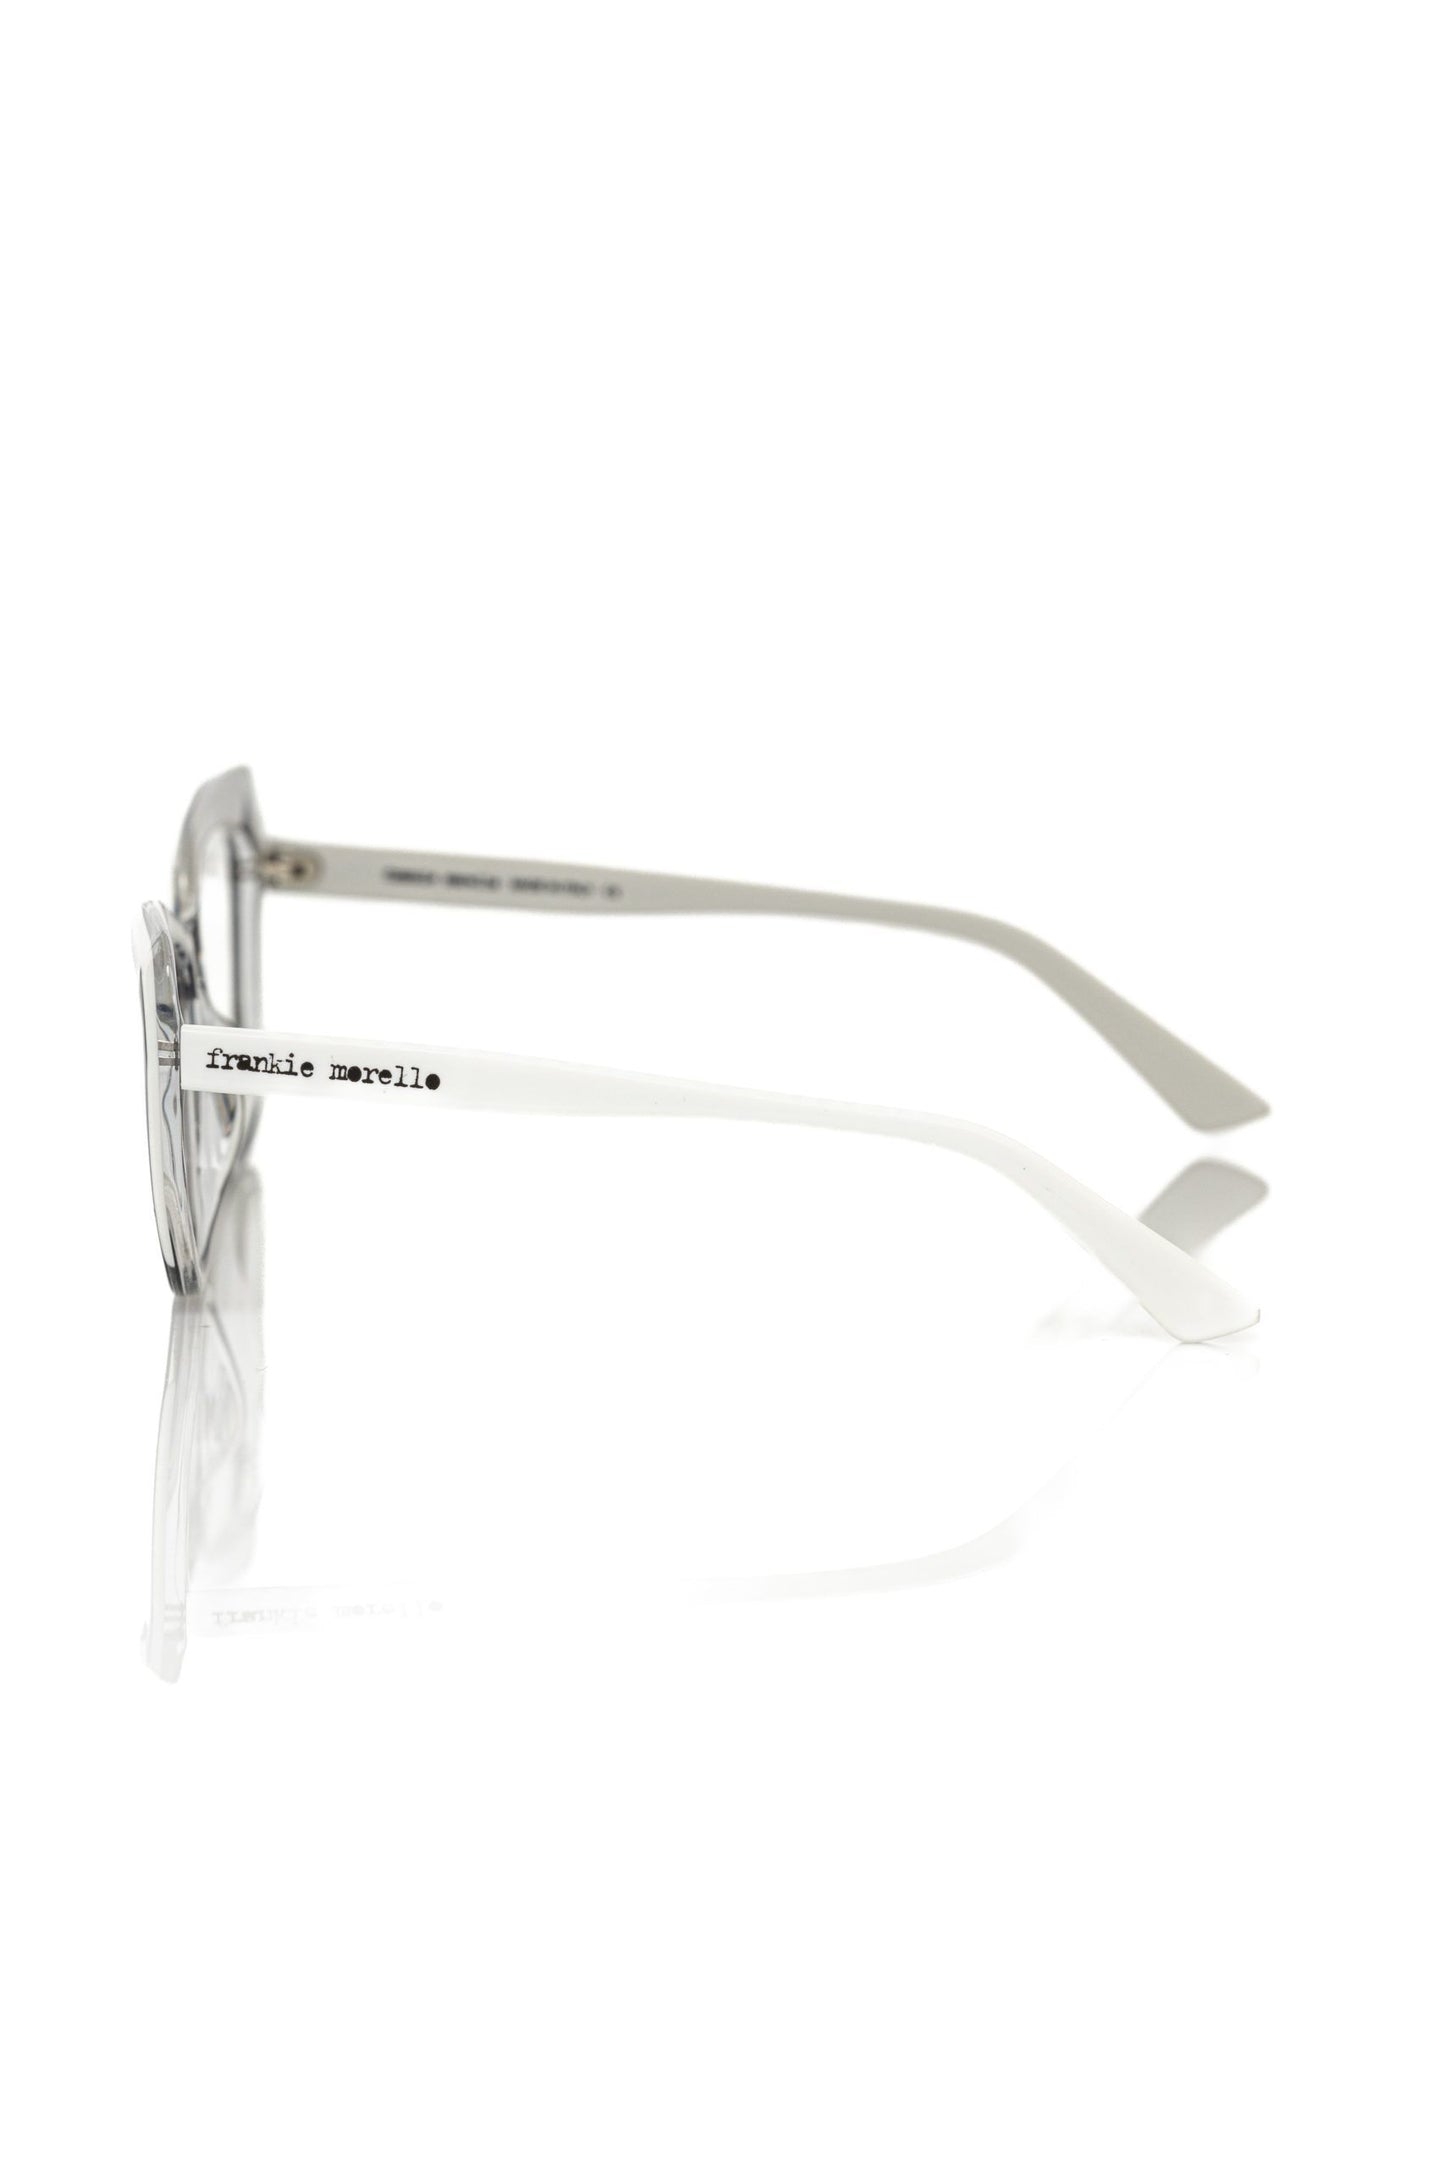 Frankie Morello FRMO-22109 Multicolor Acetate Frames - Designed by Frankie Morello Available to Buy at a Discounted Price on Moon Behind The Hill Online Designer Discount Store